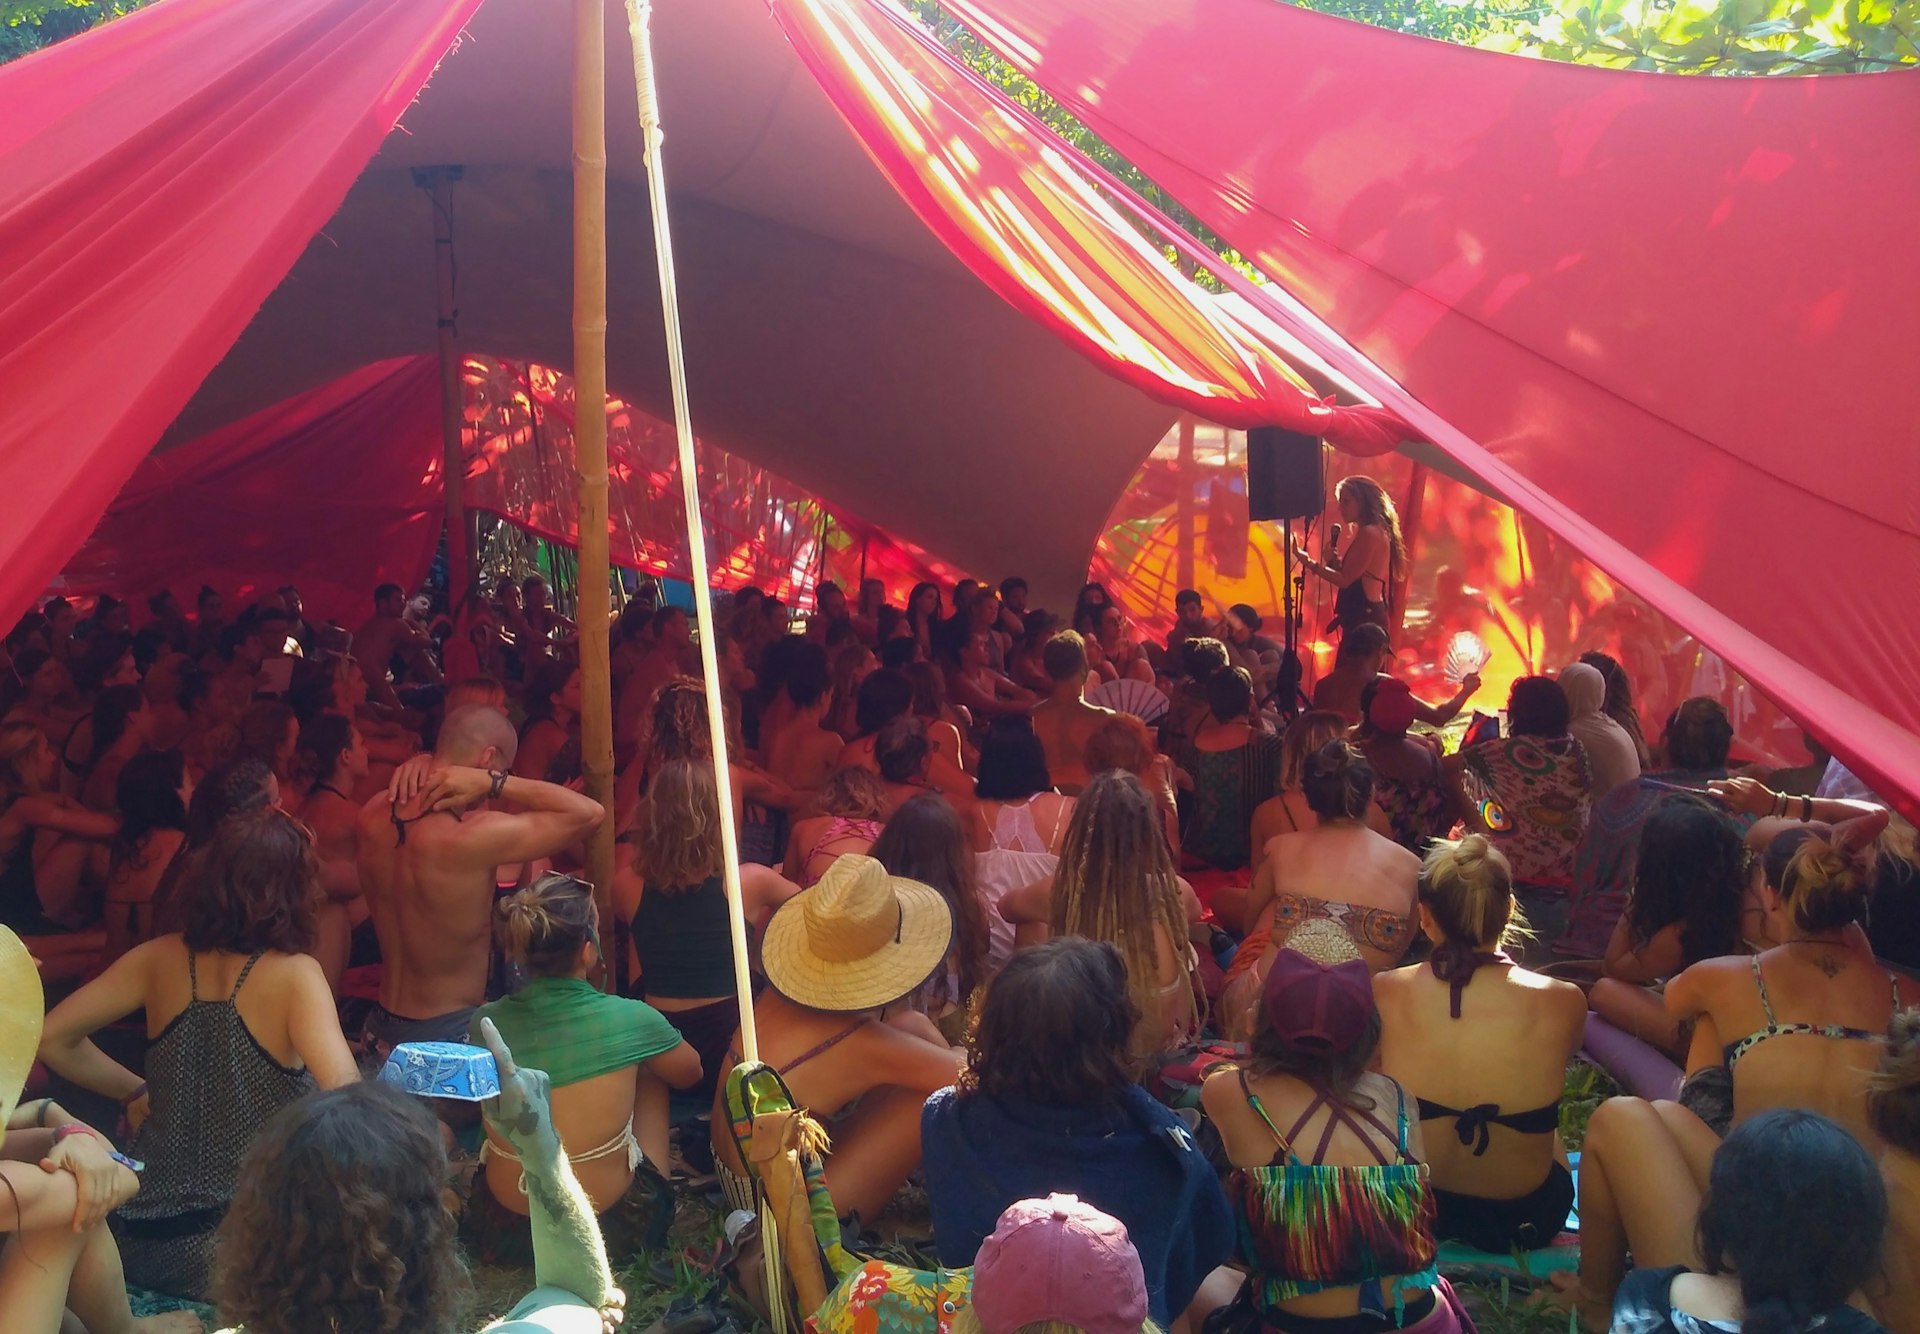 Dozens of women sit in a shady cloth tent as they listen to a speaker talking with a microphone